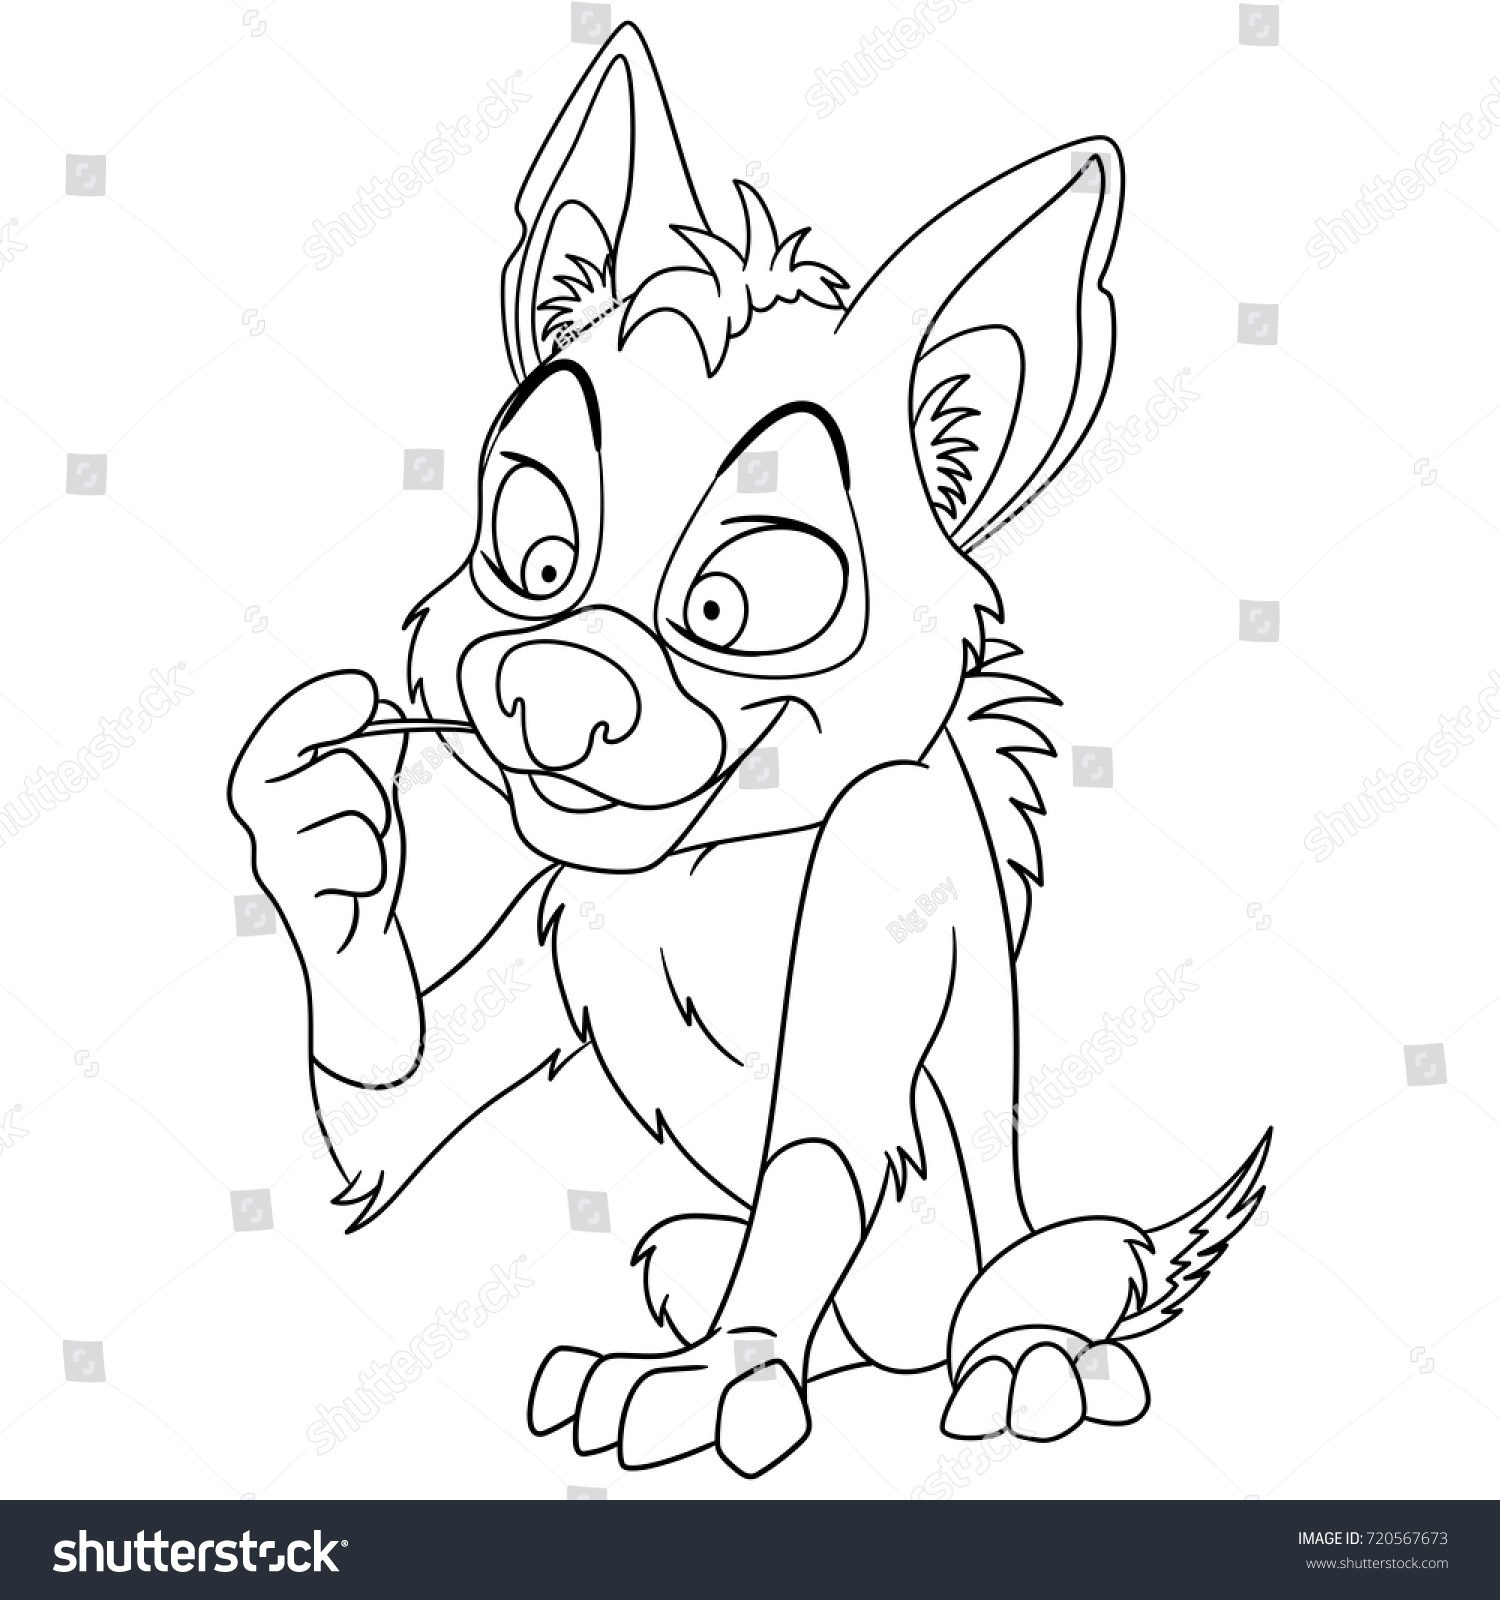 Jackal Coloring Pages at GetColorings.com | Free printable colorings